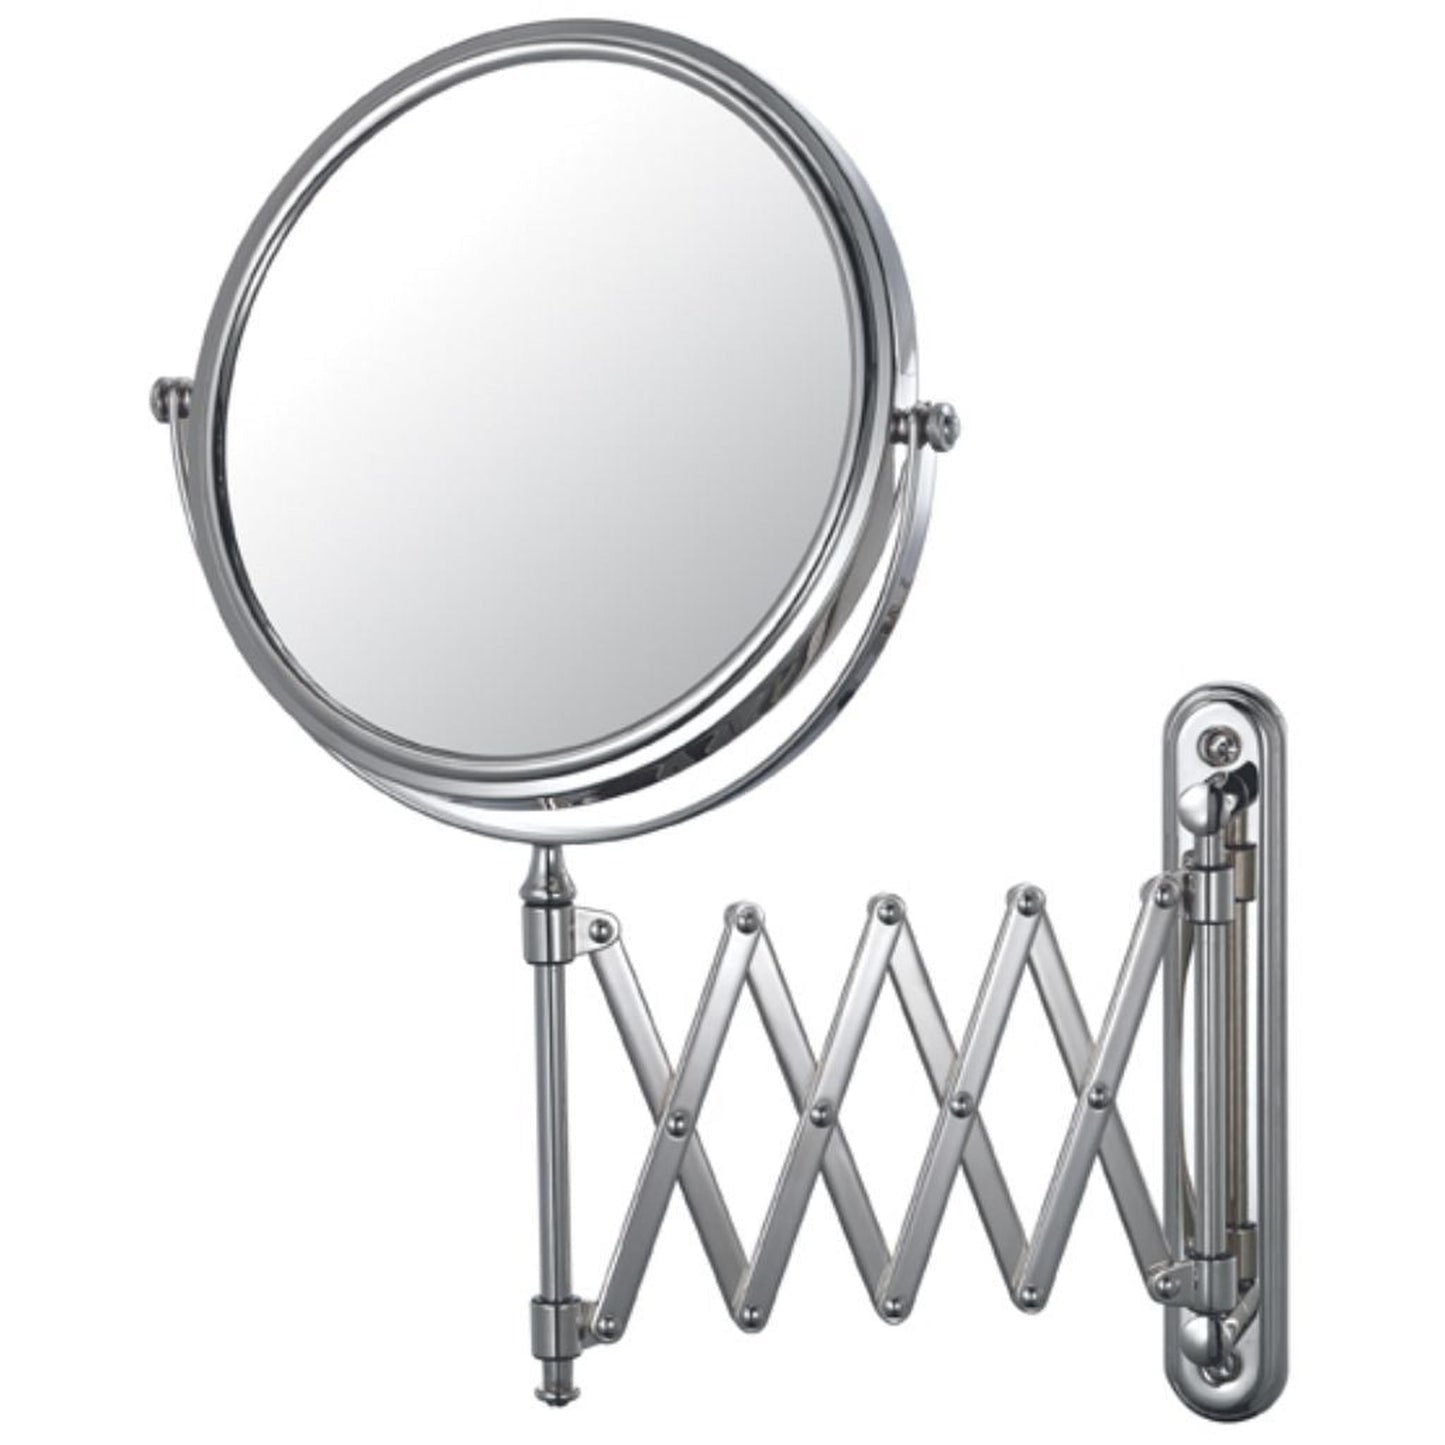 Aptations Mirror Image 9" x 15" Chrome Wall-Mounted Round 1X/5X Magnifying Makeup Mirror With Retro Accordion Extension